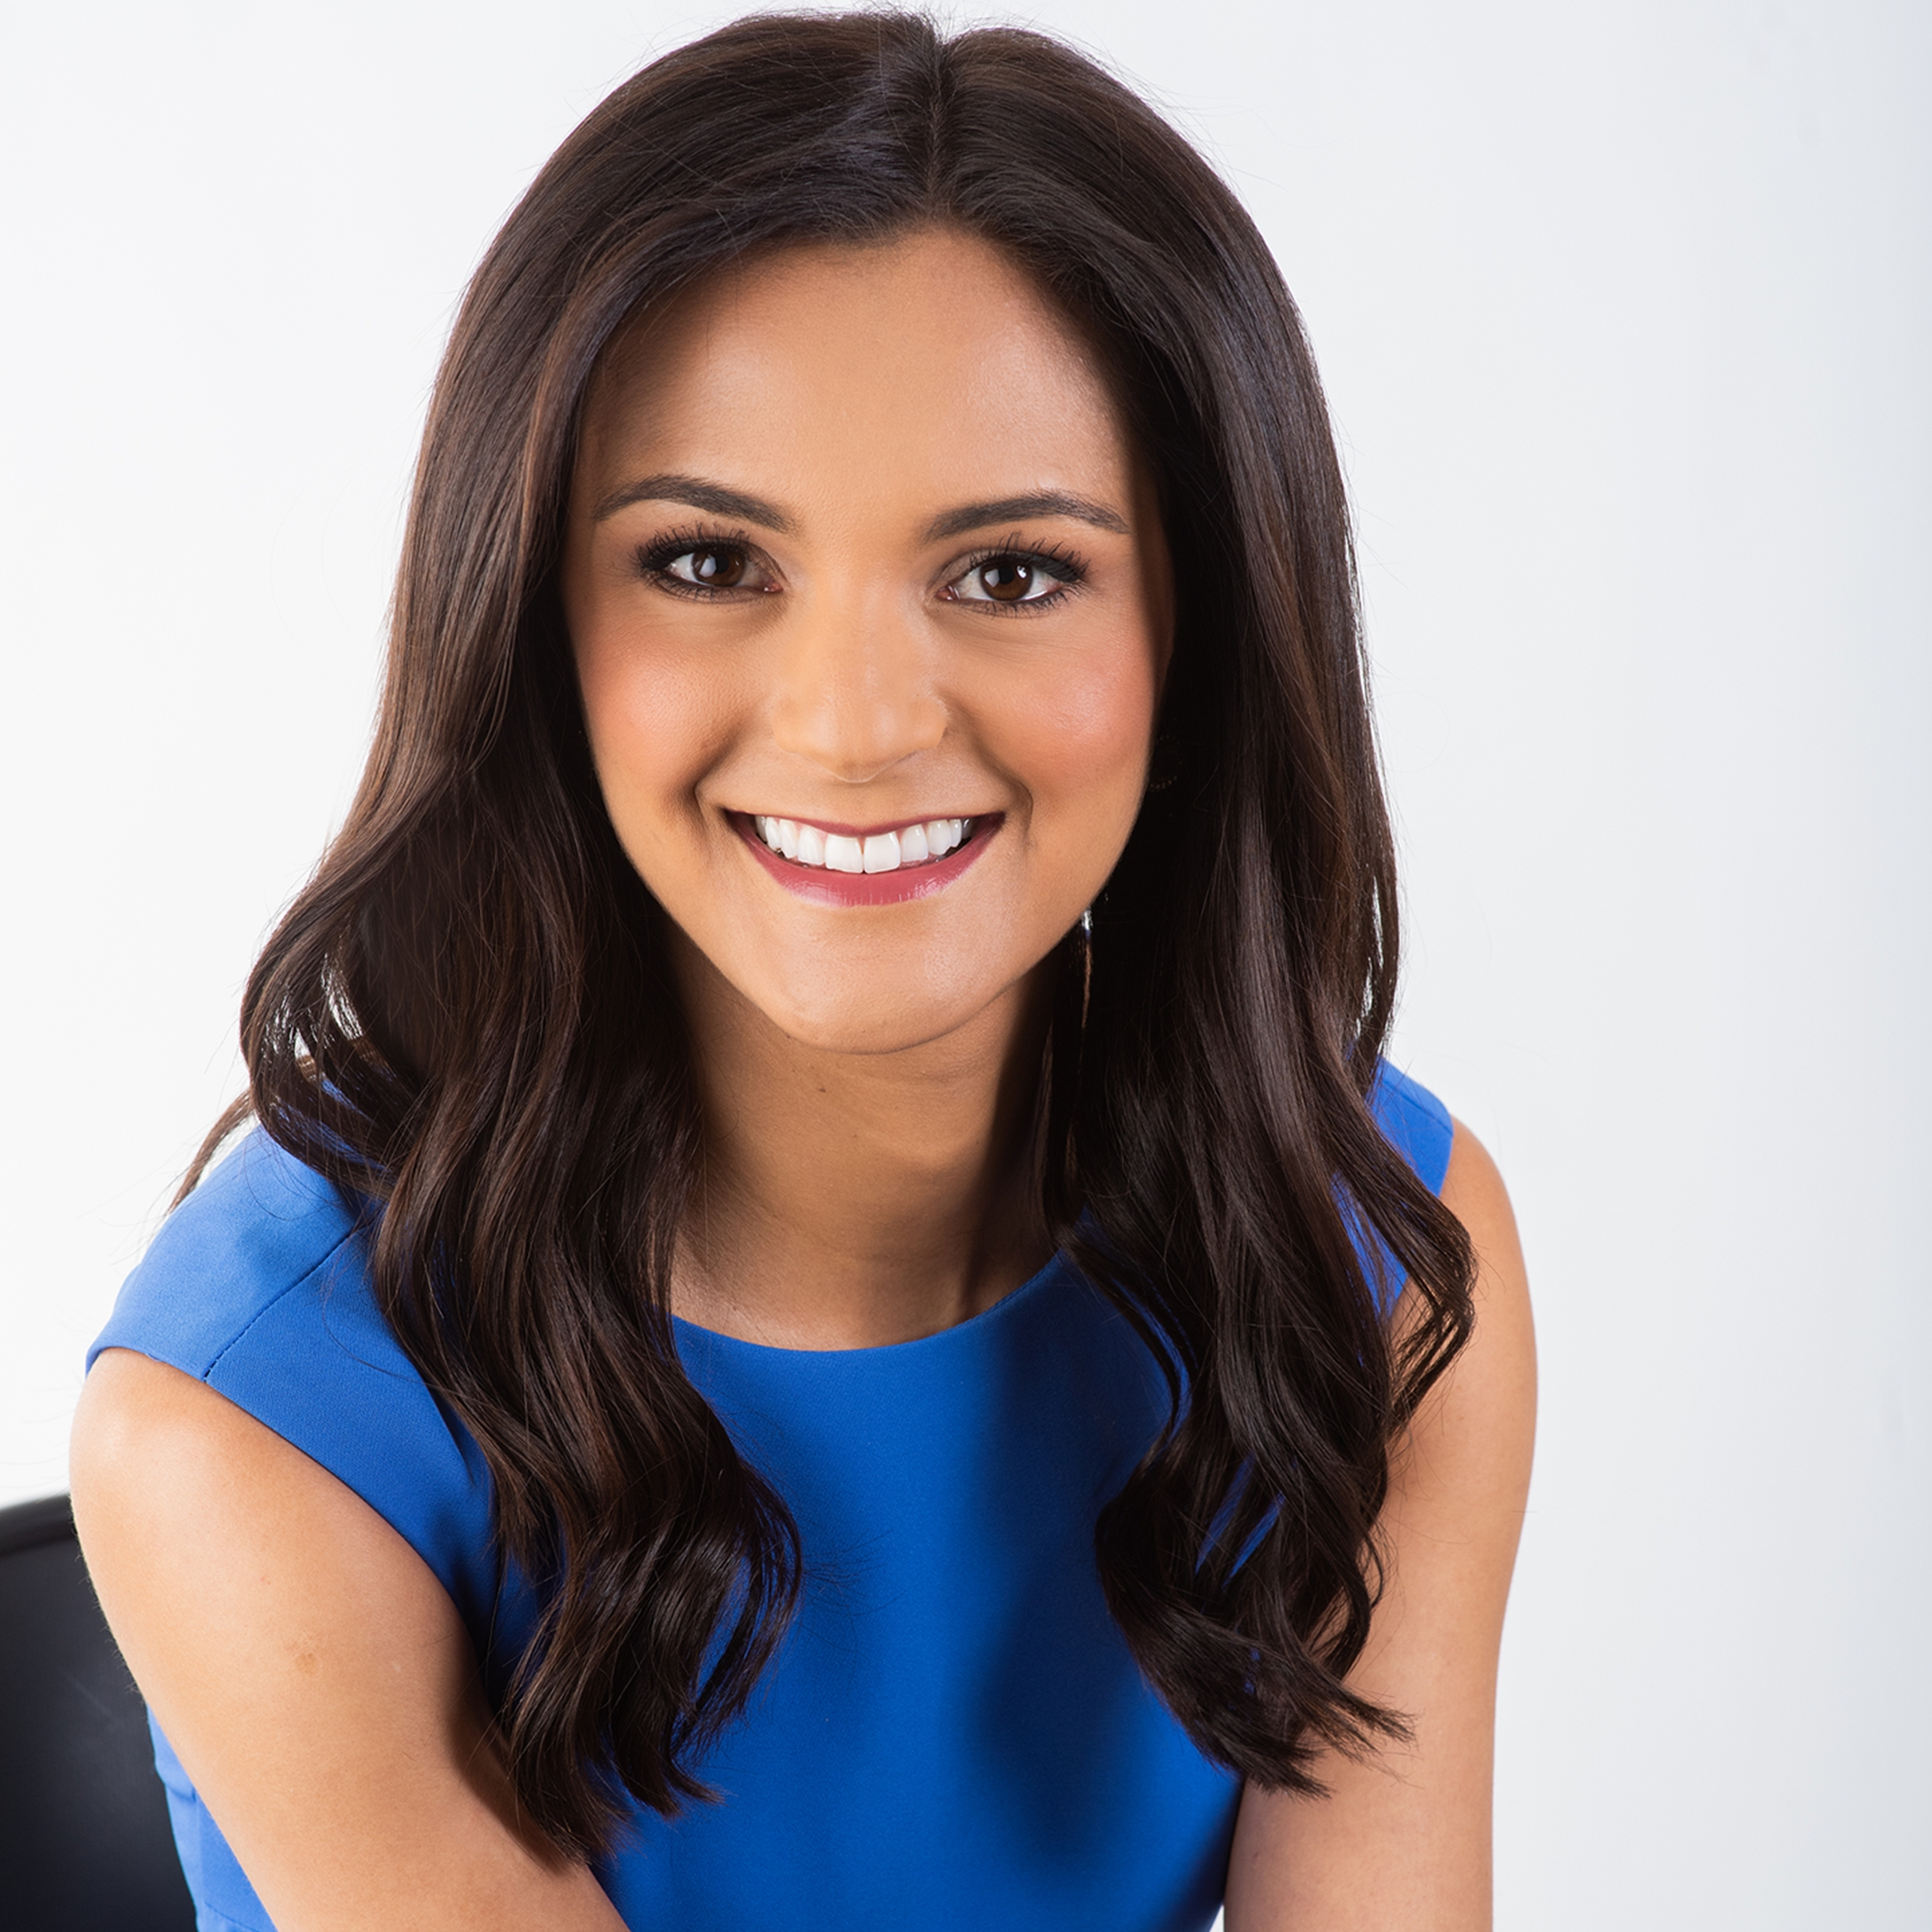 Why Is Colorado Anchor Danielle Kreutter Leaving KKTV? Facts To Know